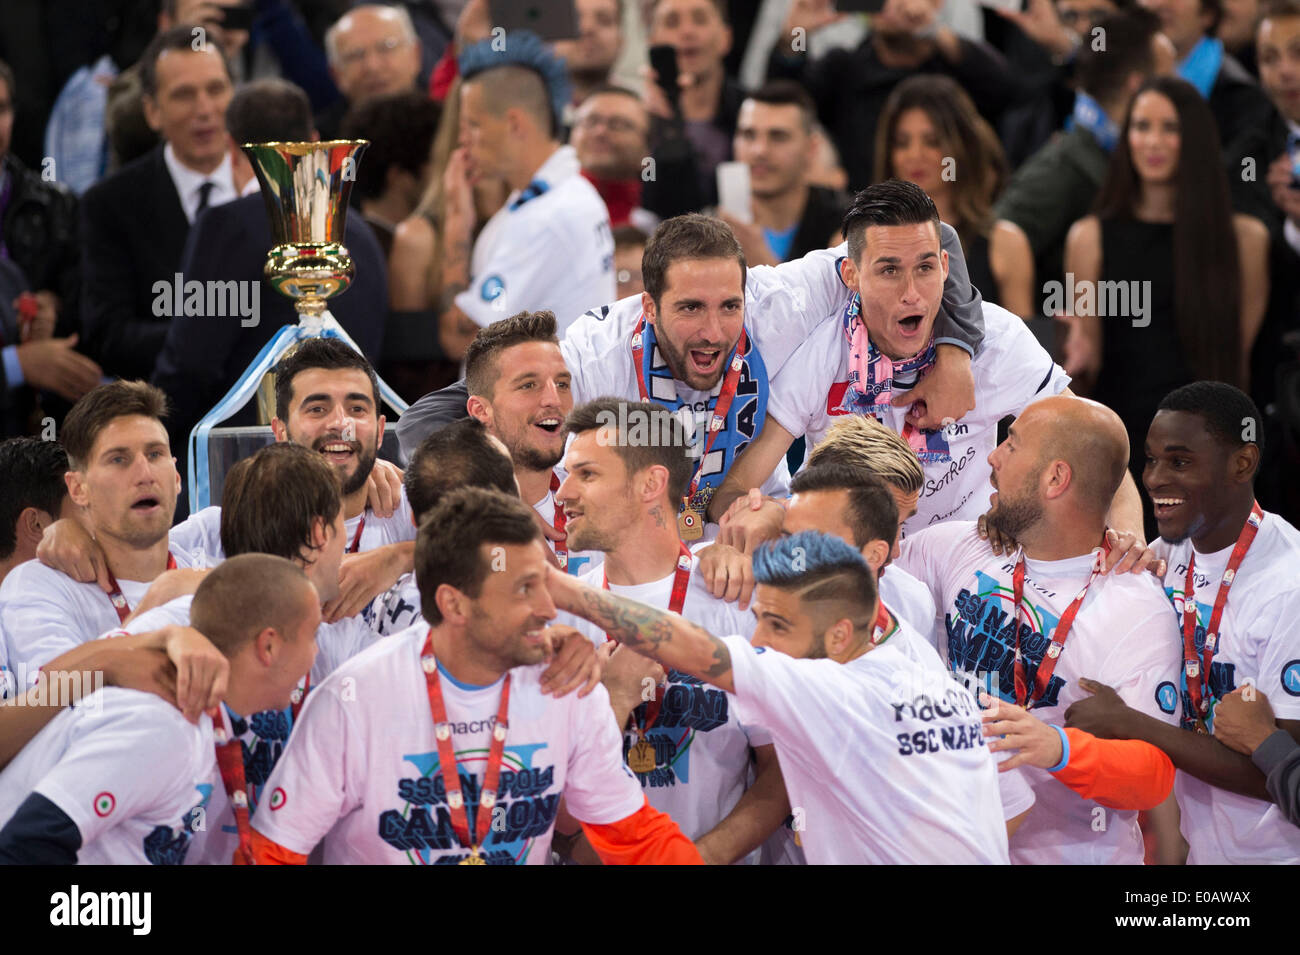 Rome, Italy. 3rd May, 2014. Napoli team group Football/Soccer : Napoli  players celebrate after winning the Coppa Italia (TIM Cup) Final match  between ACF Fiorentina 1-3 SSC Napoli at Stadio Olimpico in